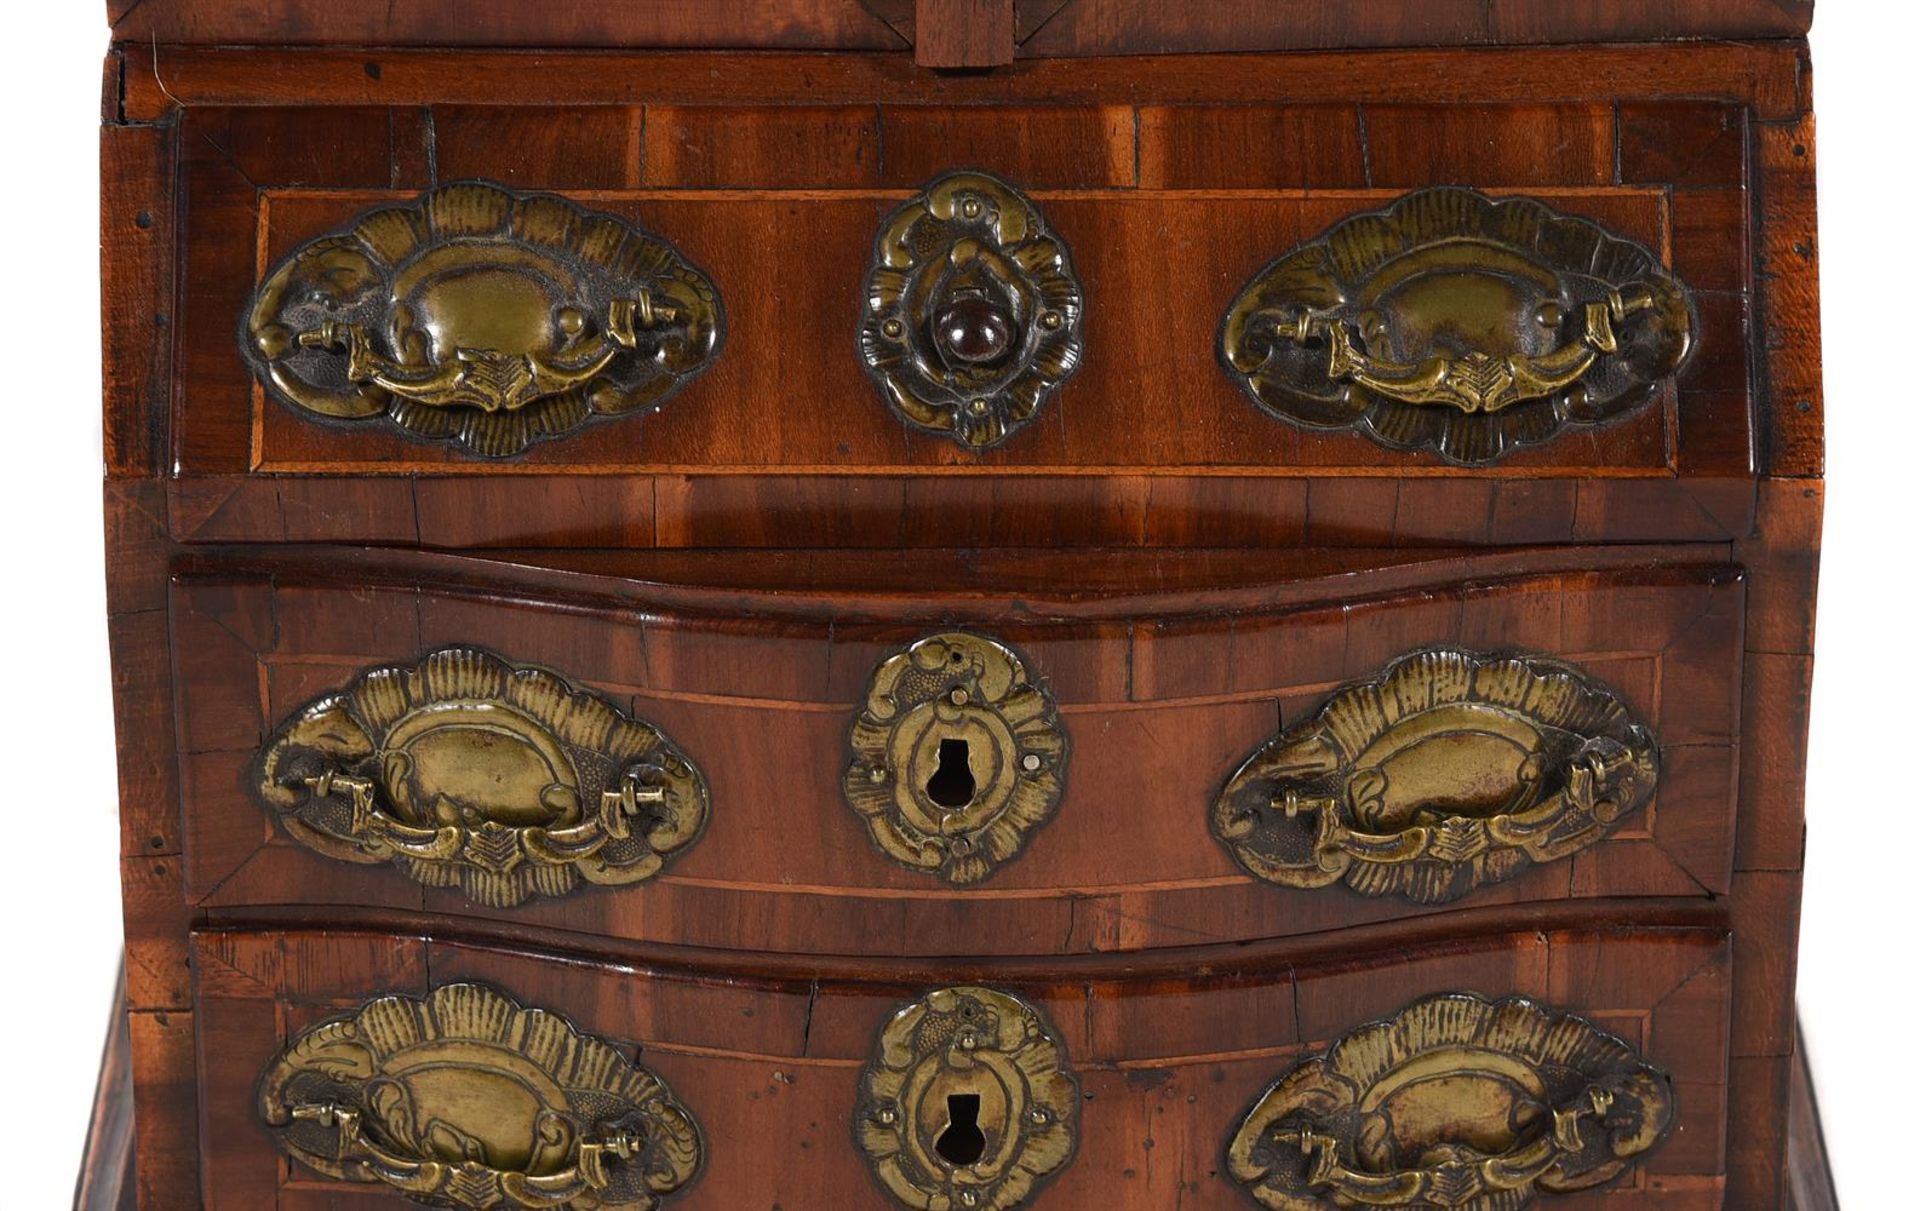 A CONTINENTAL WALNUT AND LINE INLAID MINIATURE OR APPRENTICE BUREAU CABINET, MID 18TH CENTURY - Image 3 of 3